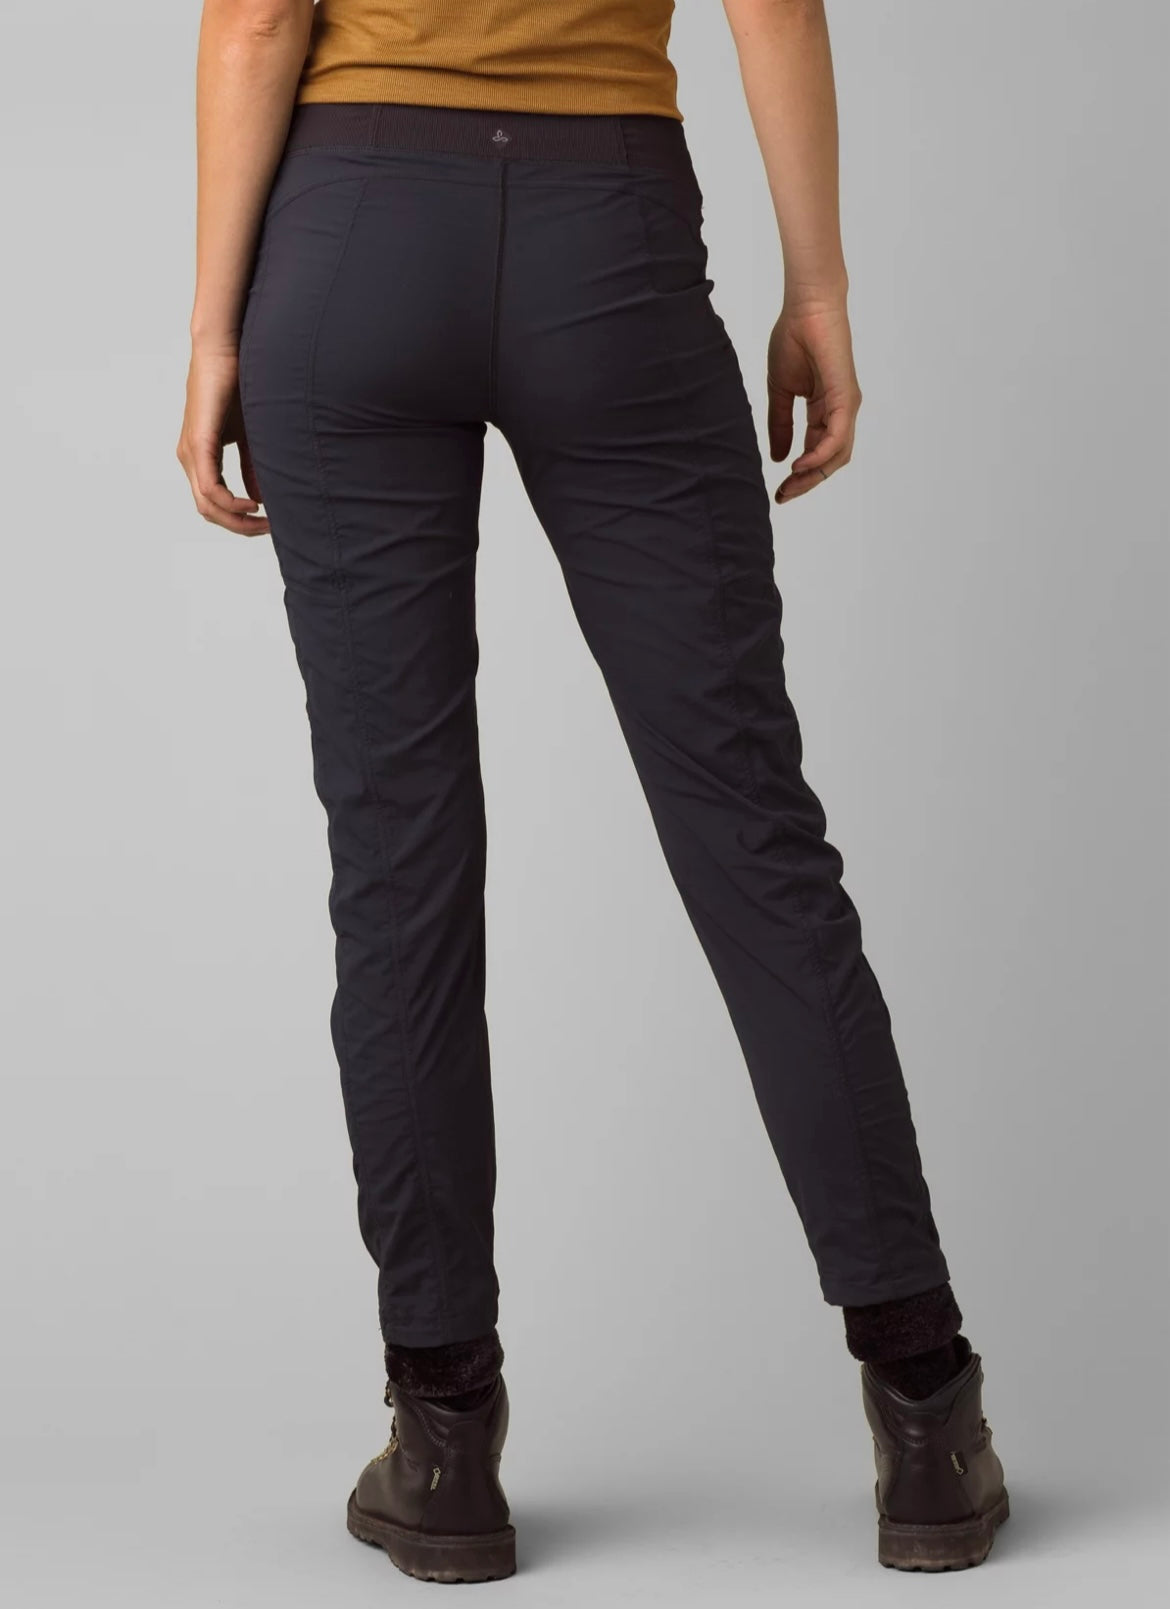 Shop Buy 😀 prAna Briann Pant Women's 🤩 - Great Save on Money and